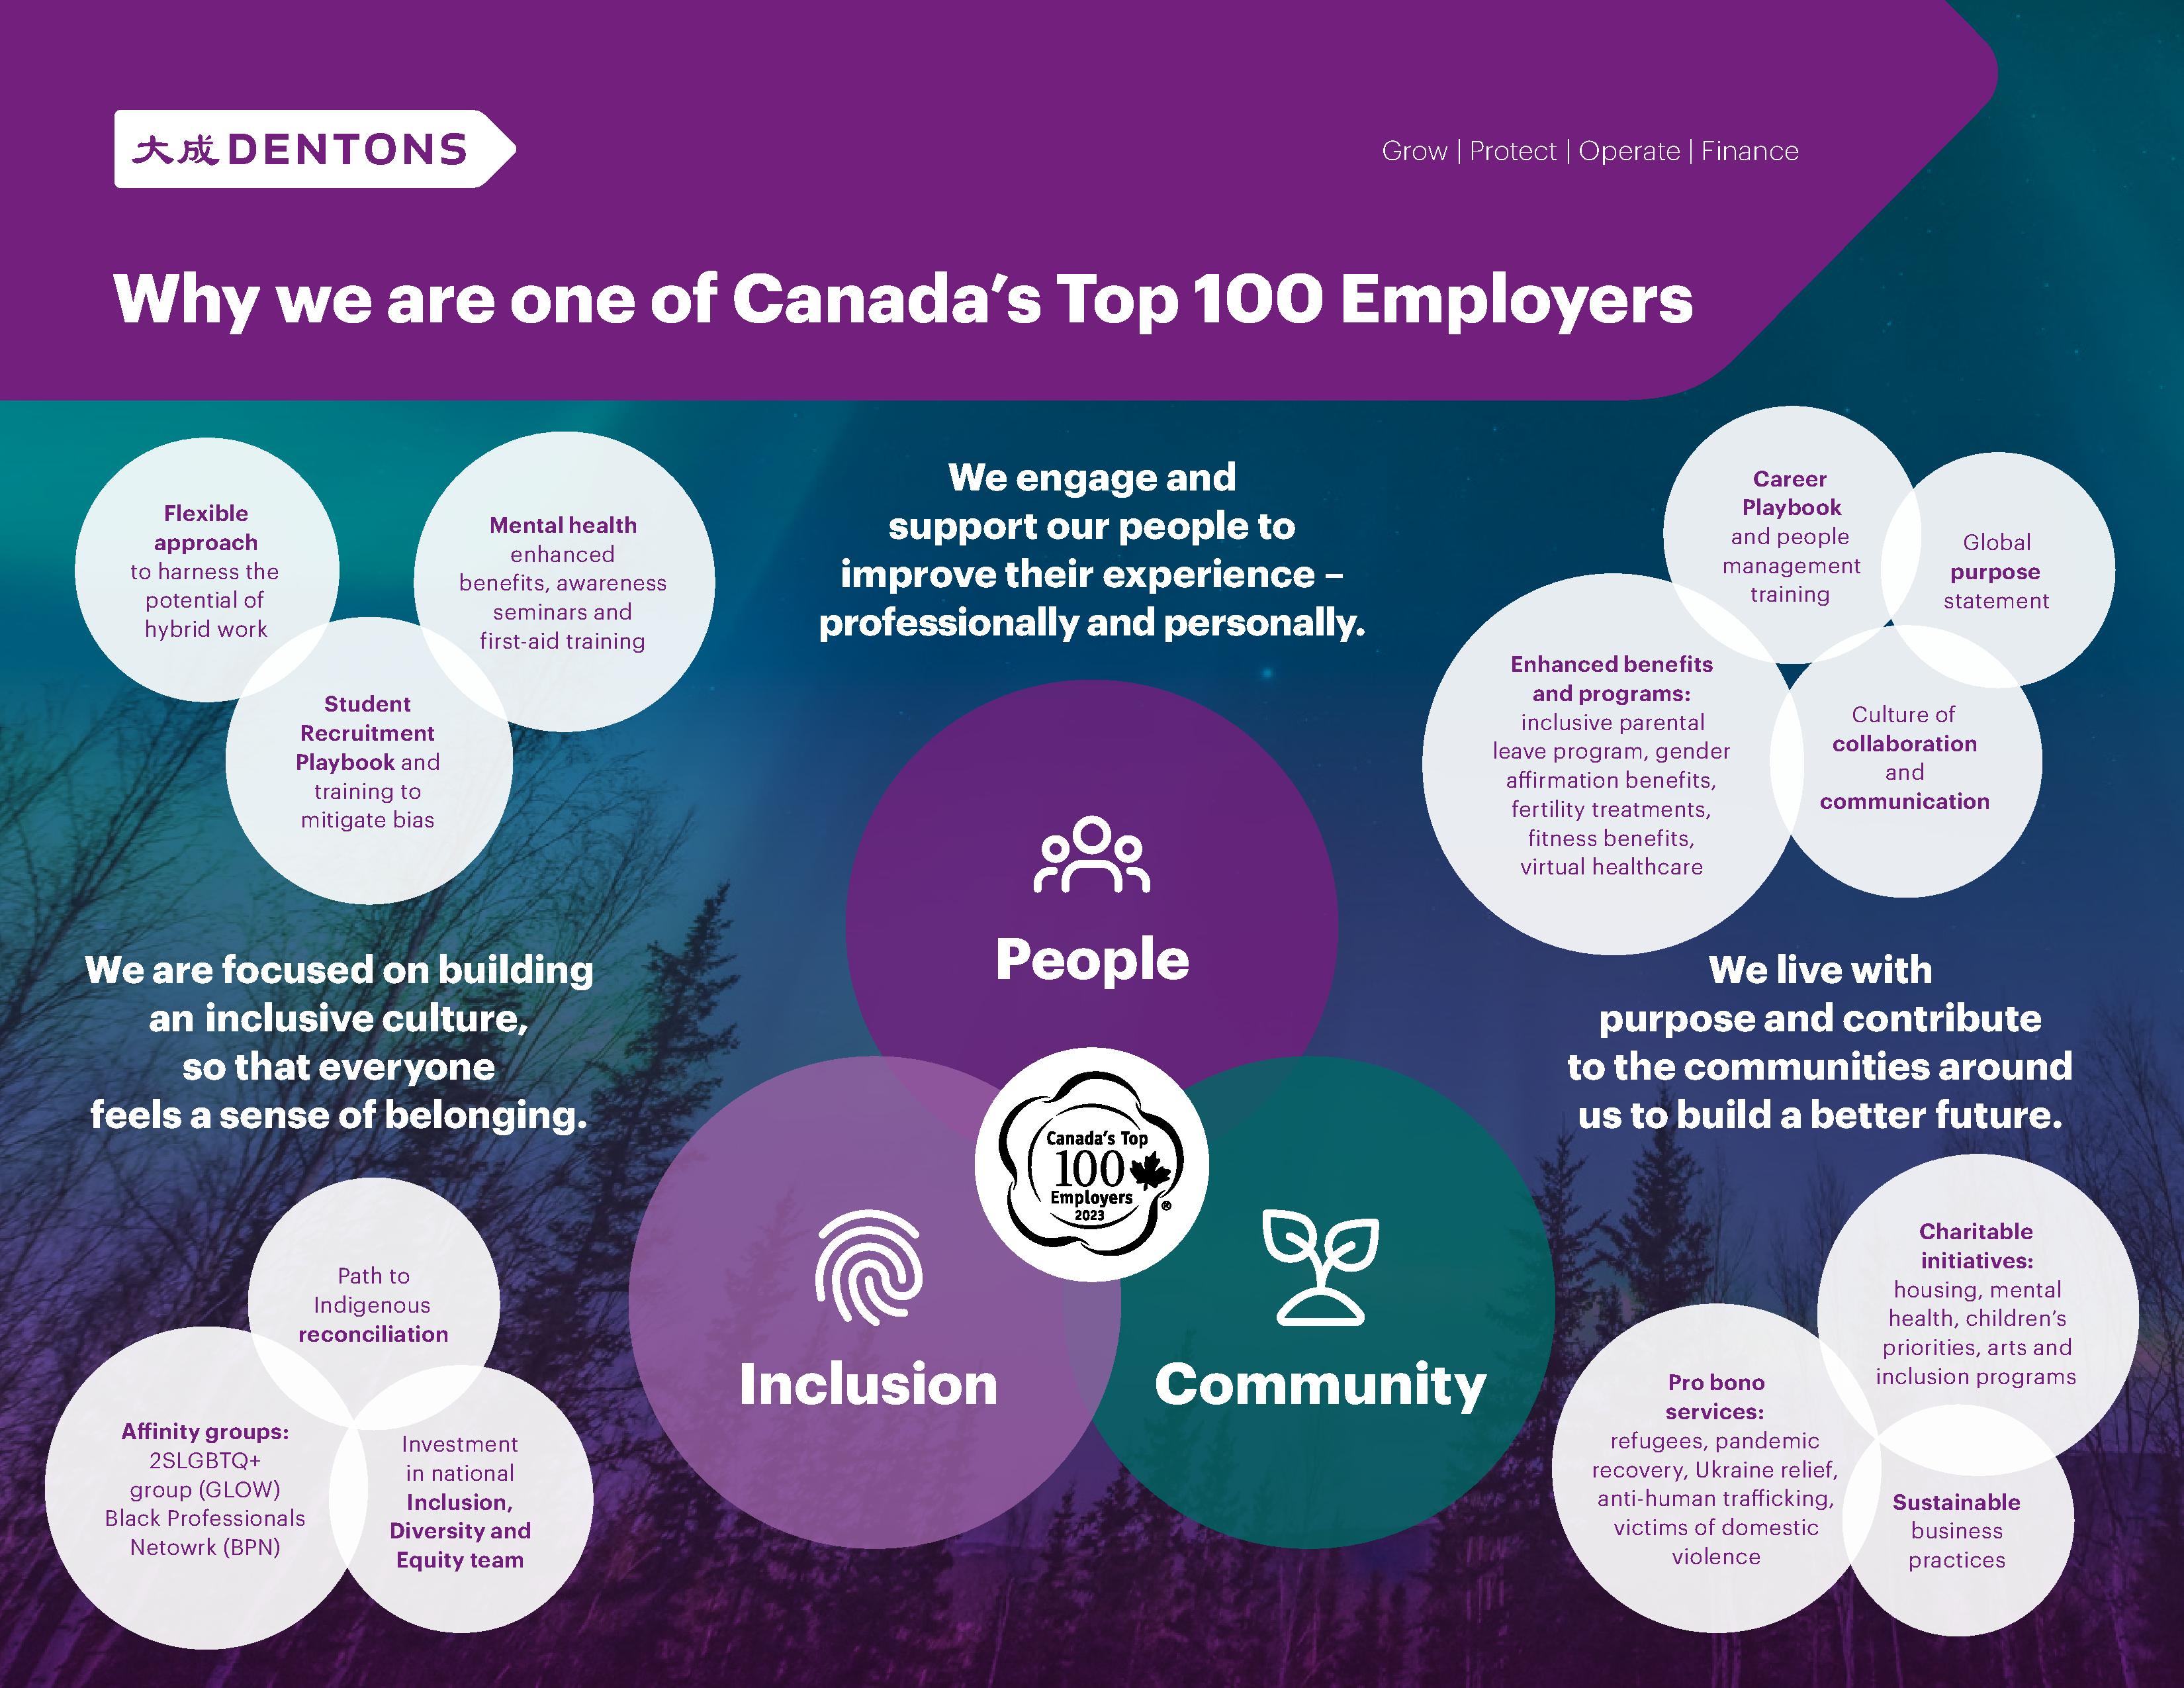 Why are we Canada's Top 100 Employers